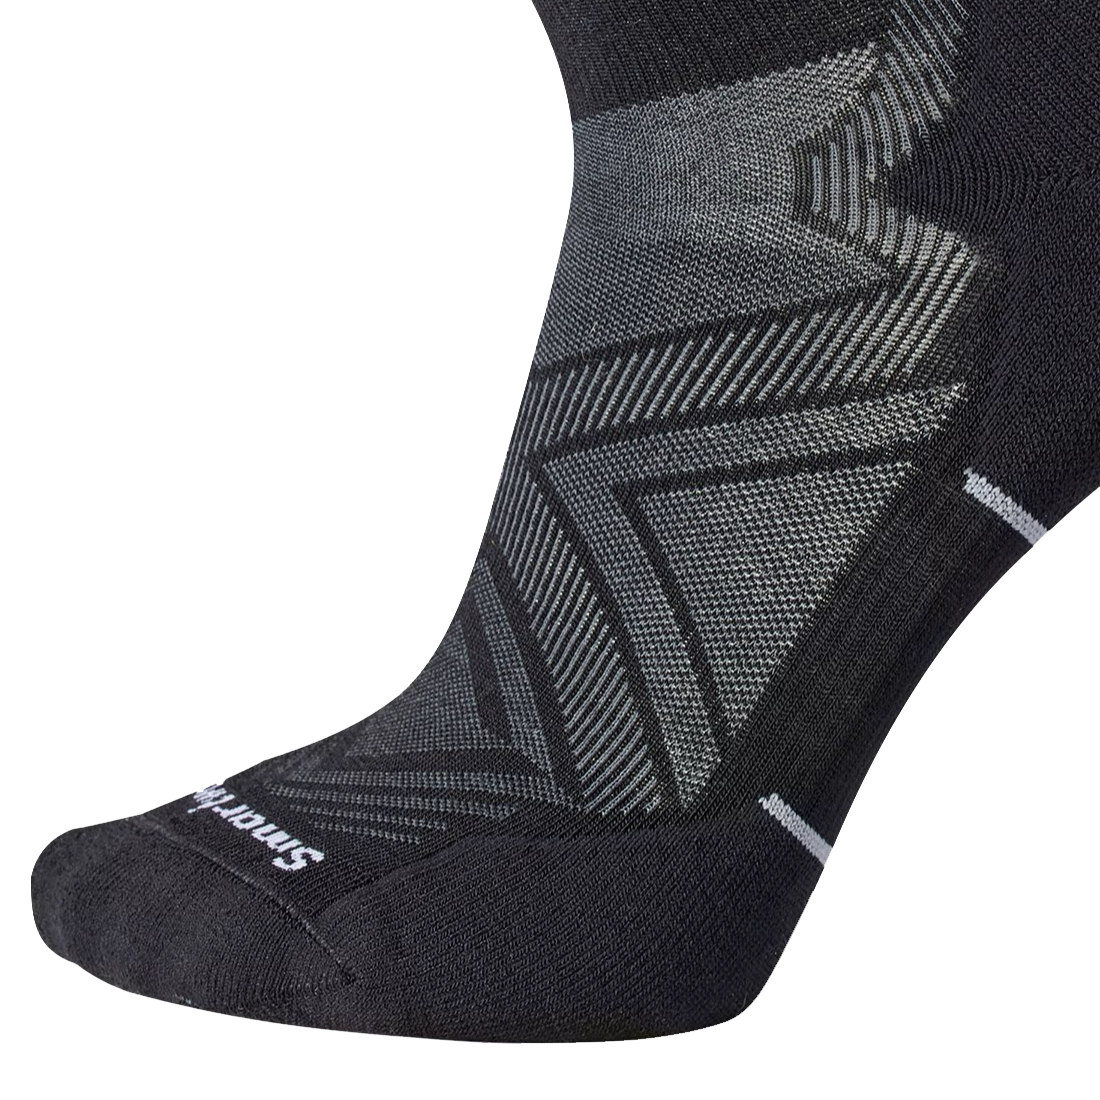 Men's Run Targeted Cushion Ankle alternate view